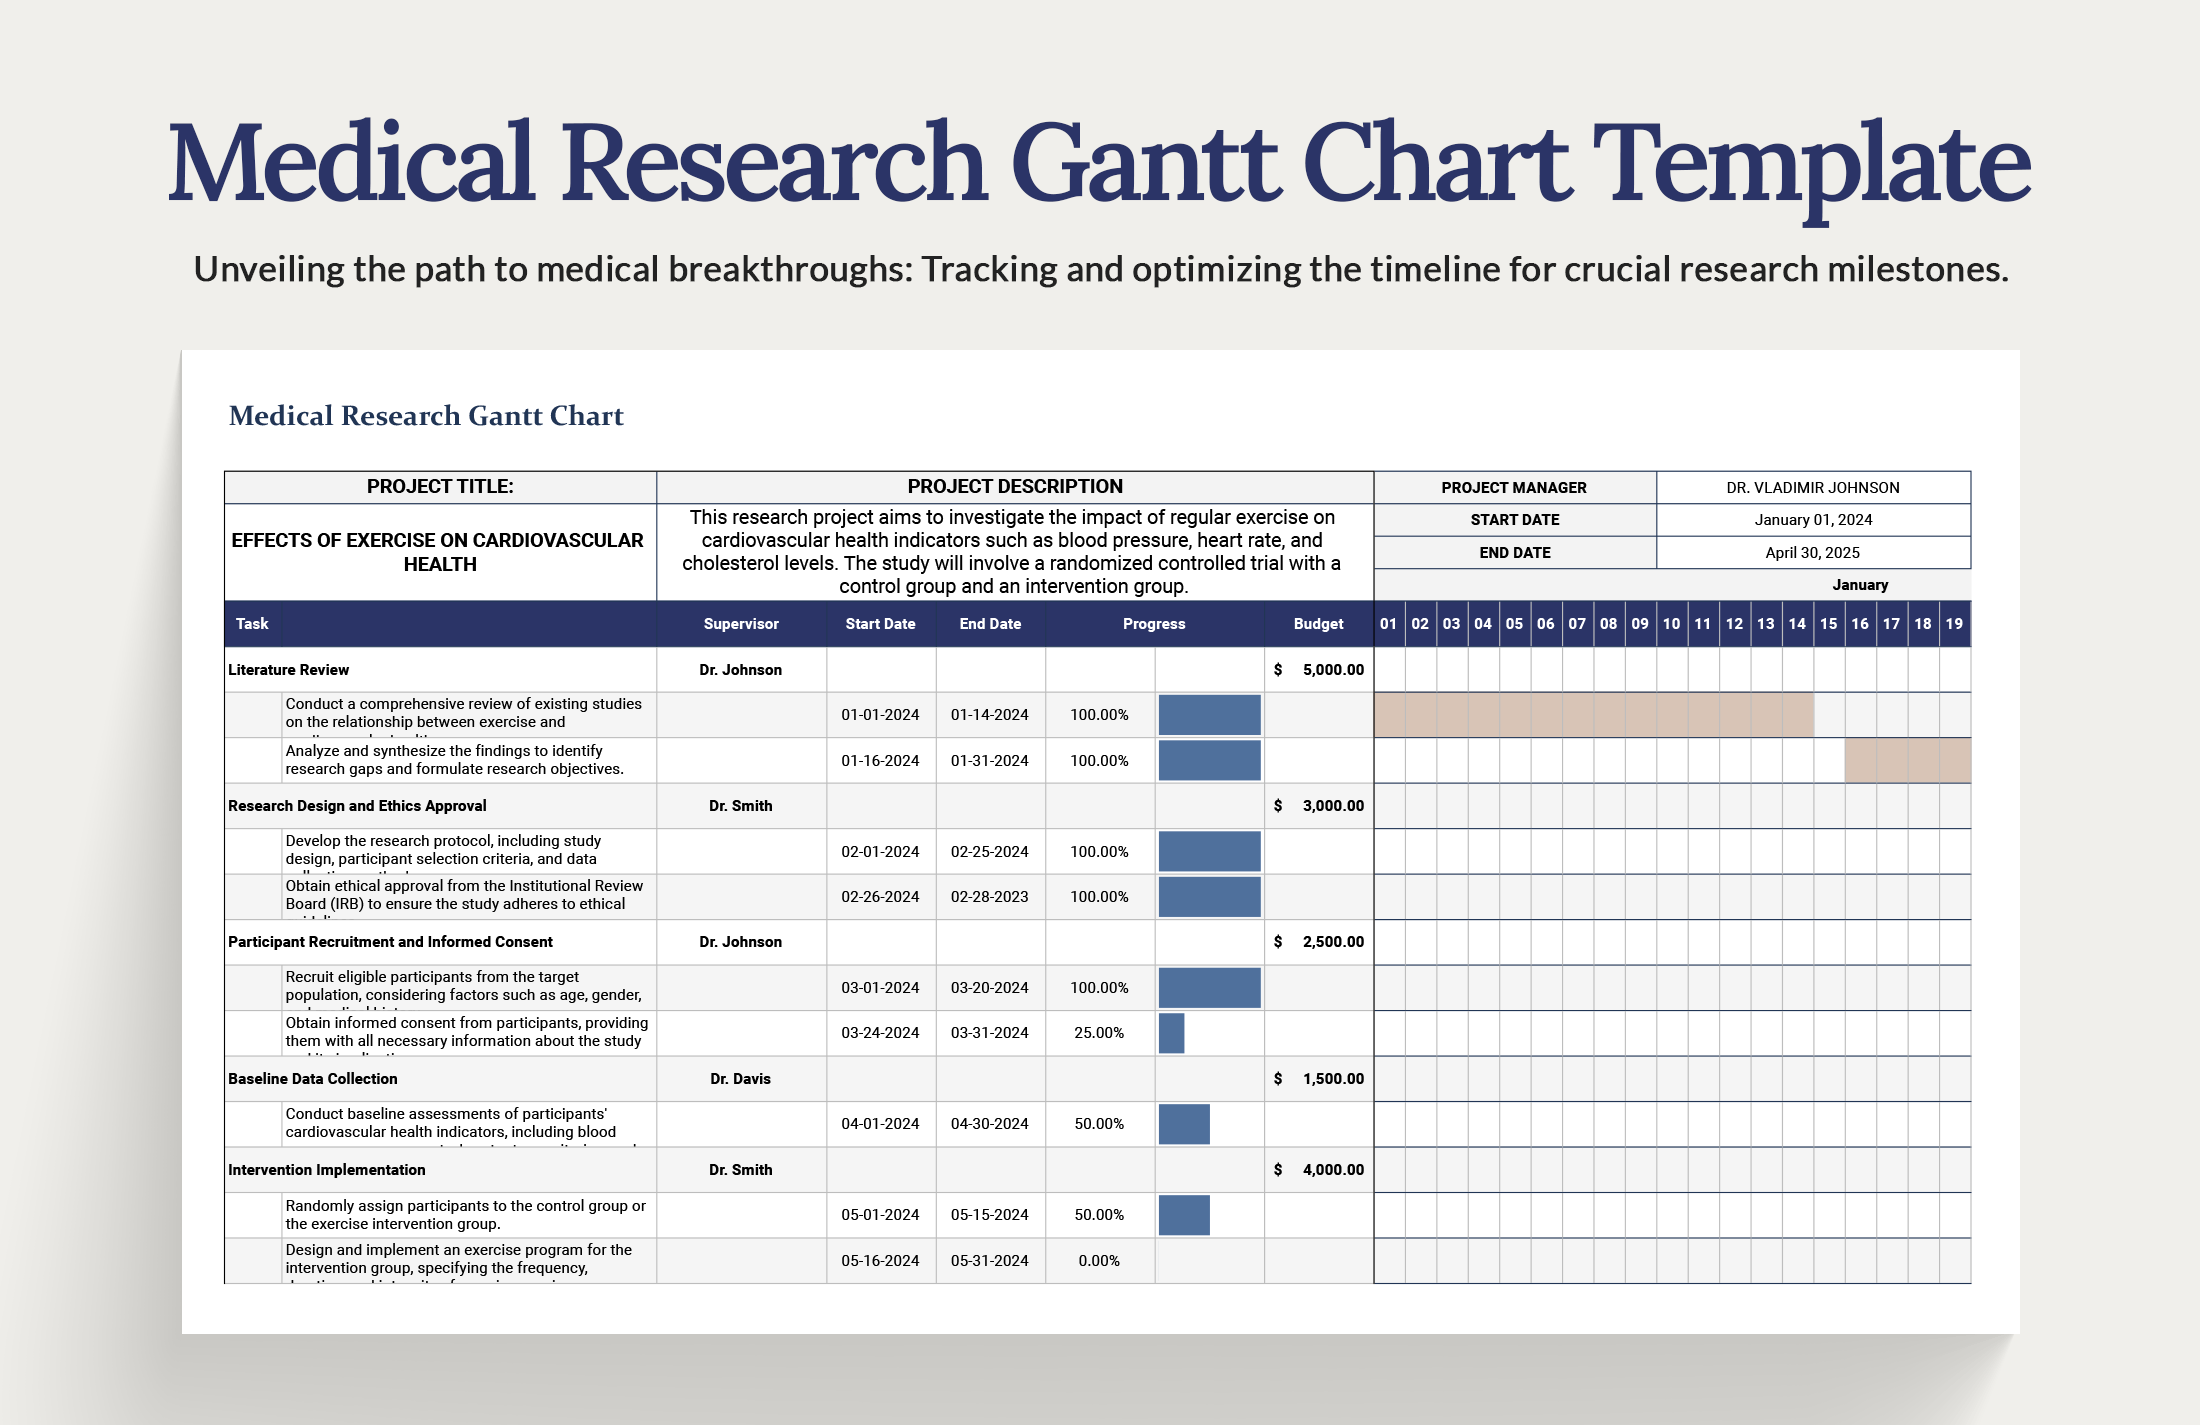 Qualitative Research Proposal Gantt Chart Template - Download in Excel ...